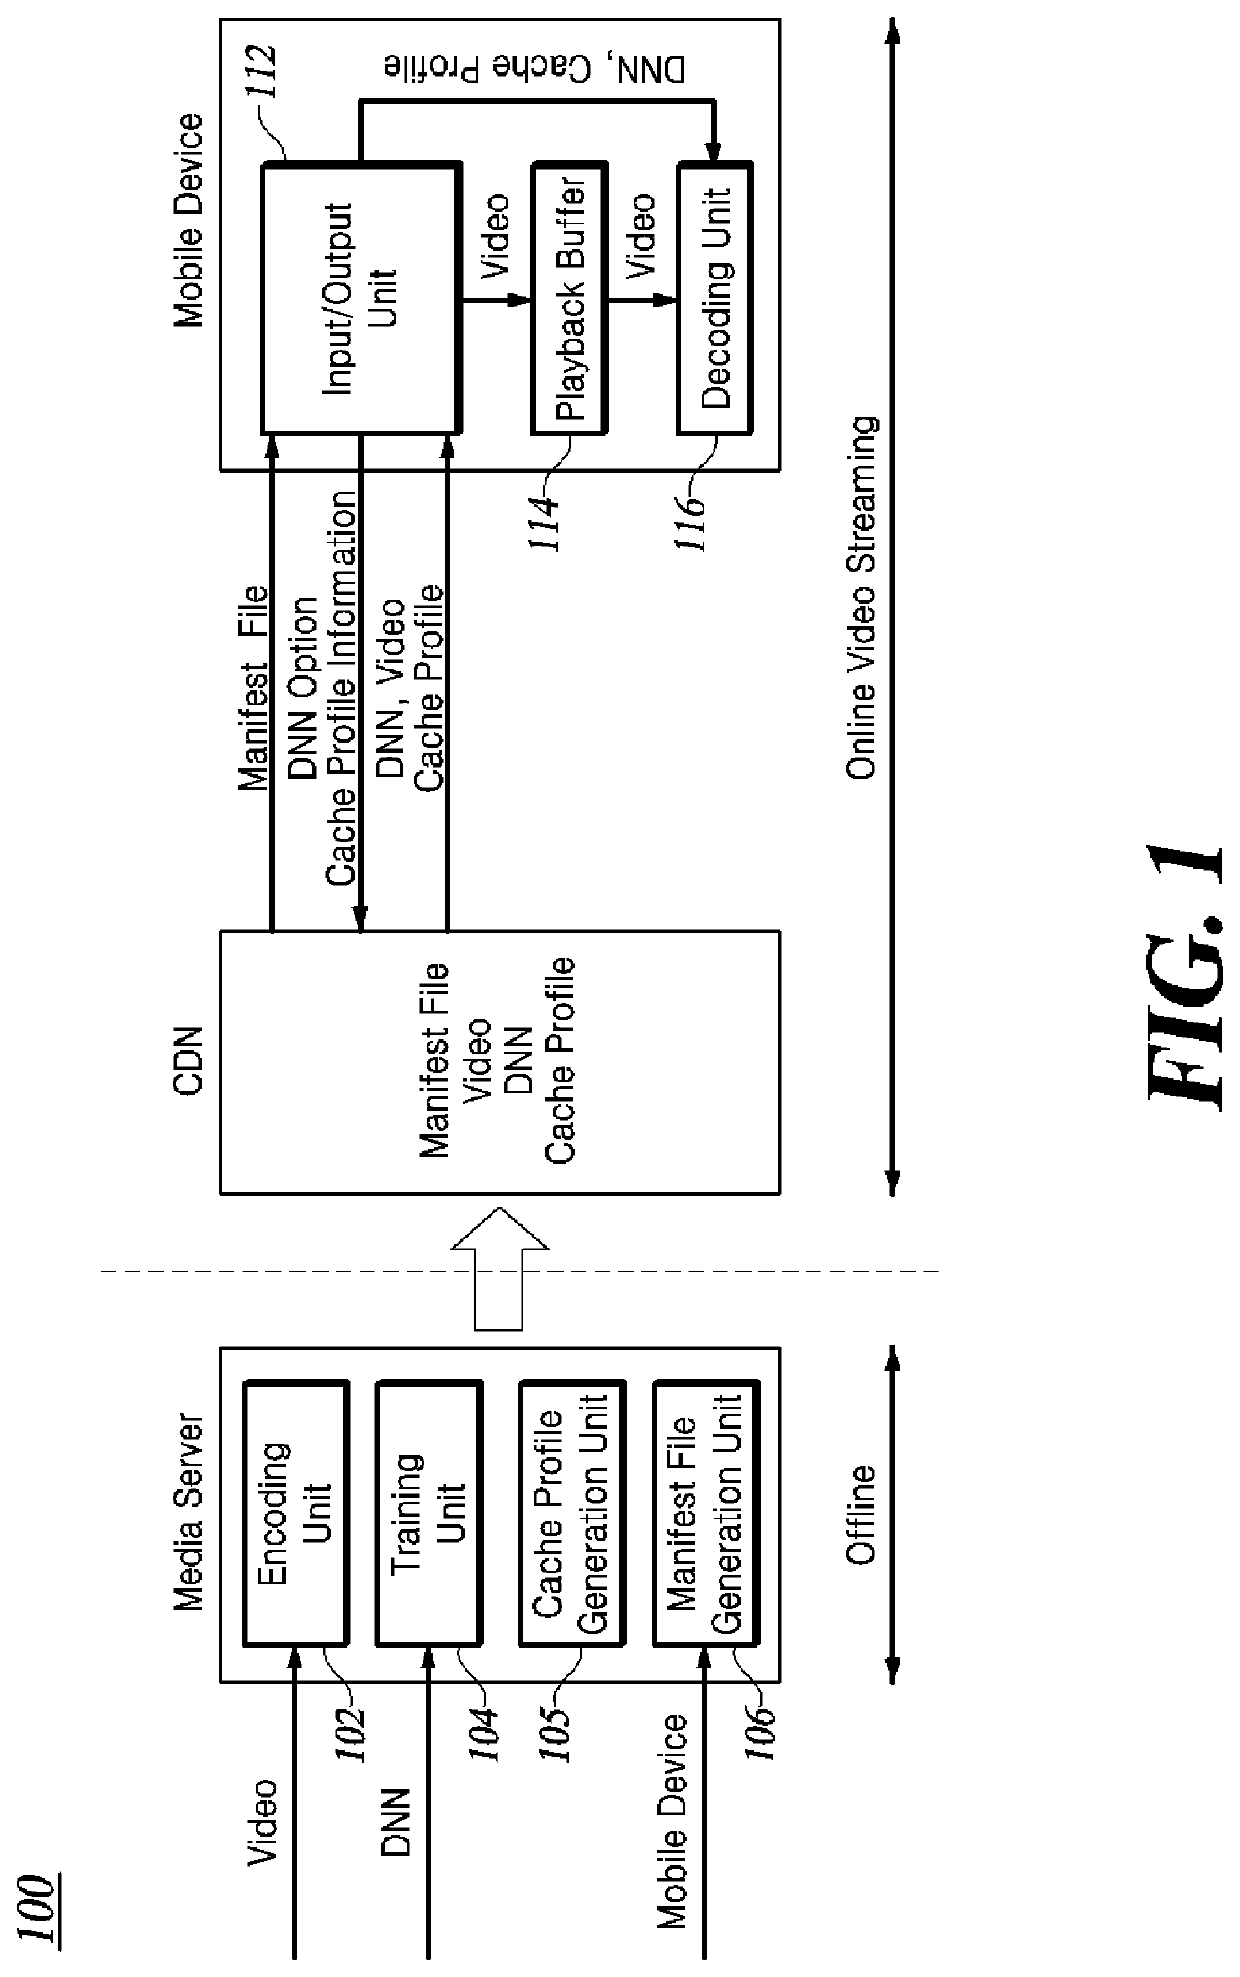 Apparatus and method for accelerating super-resolution in real-time video streaming